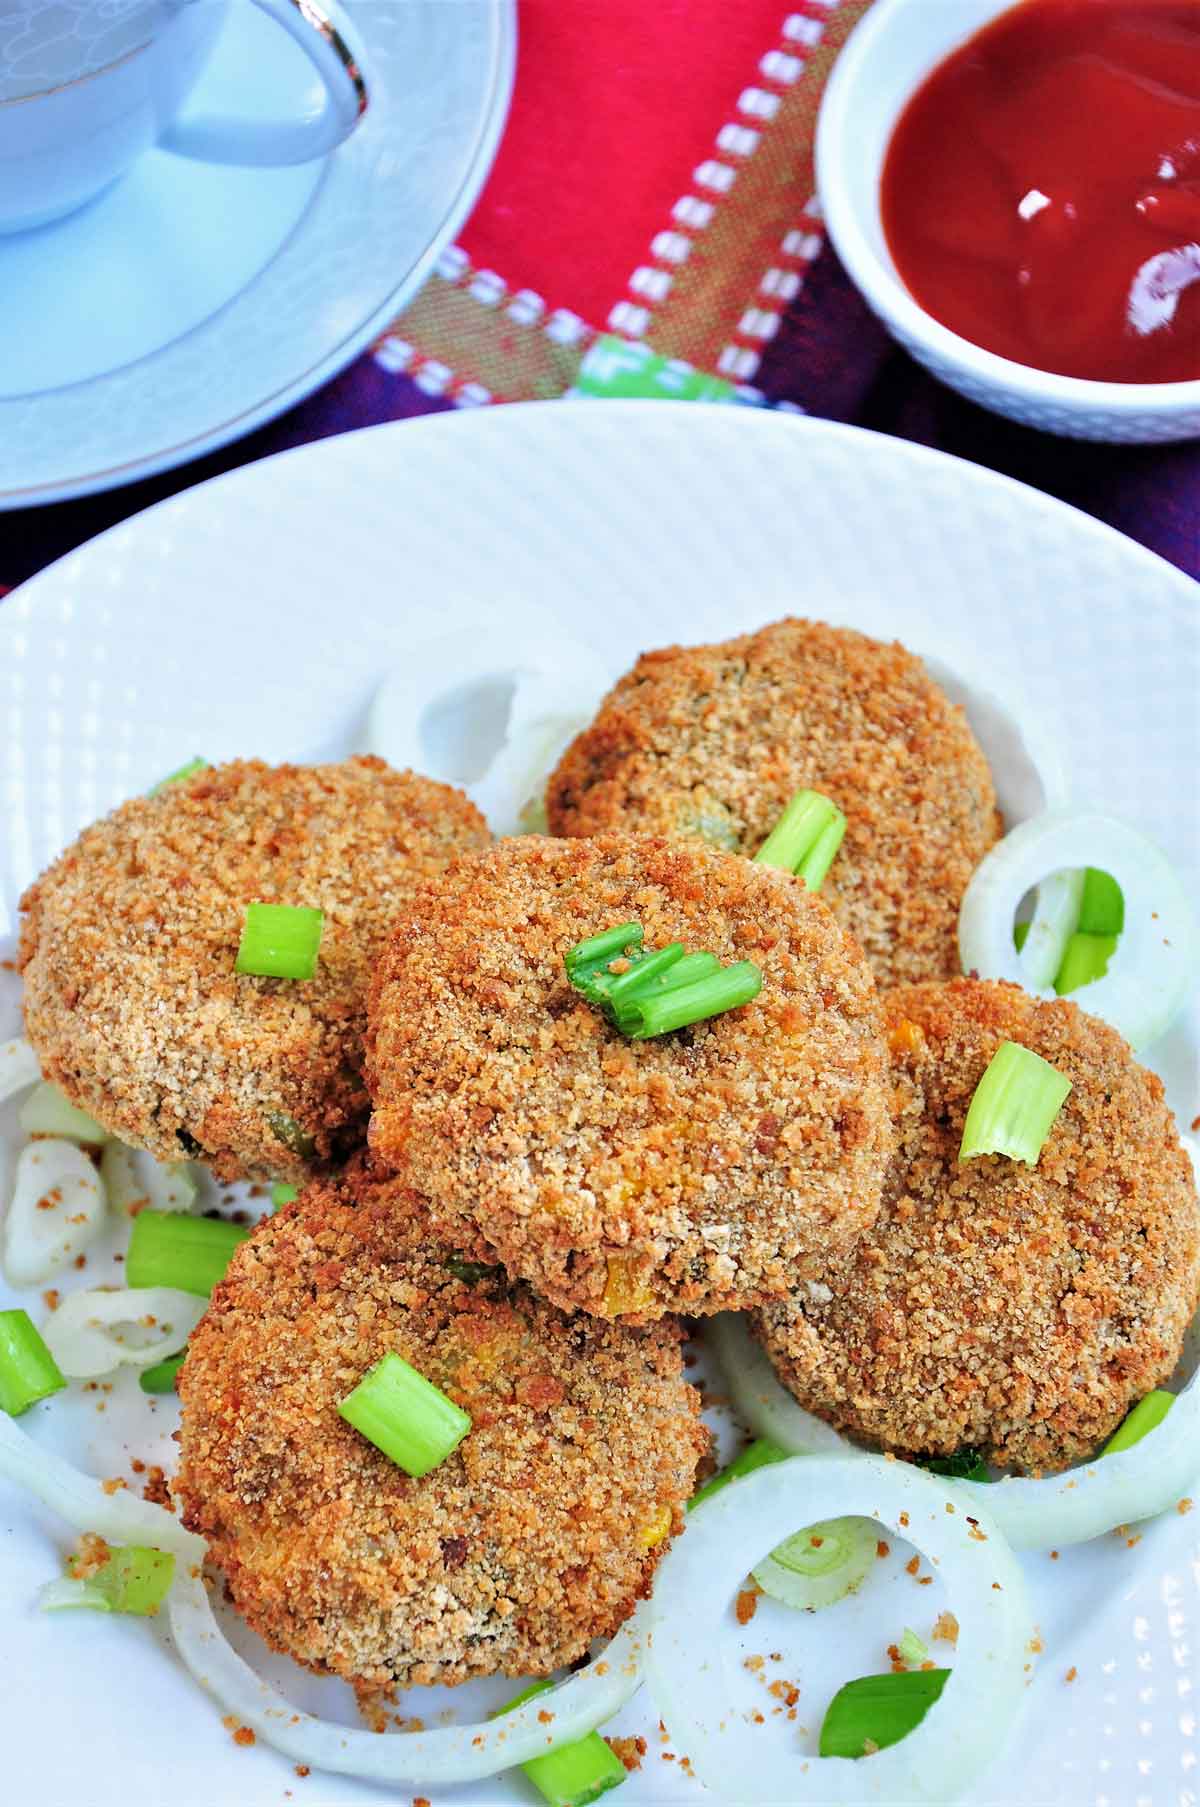 Vegetable cutlet served in a plate.